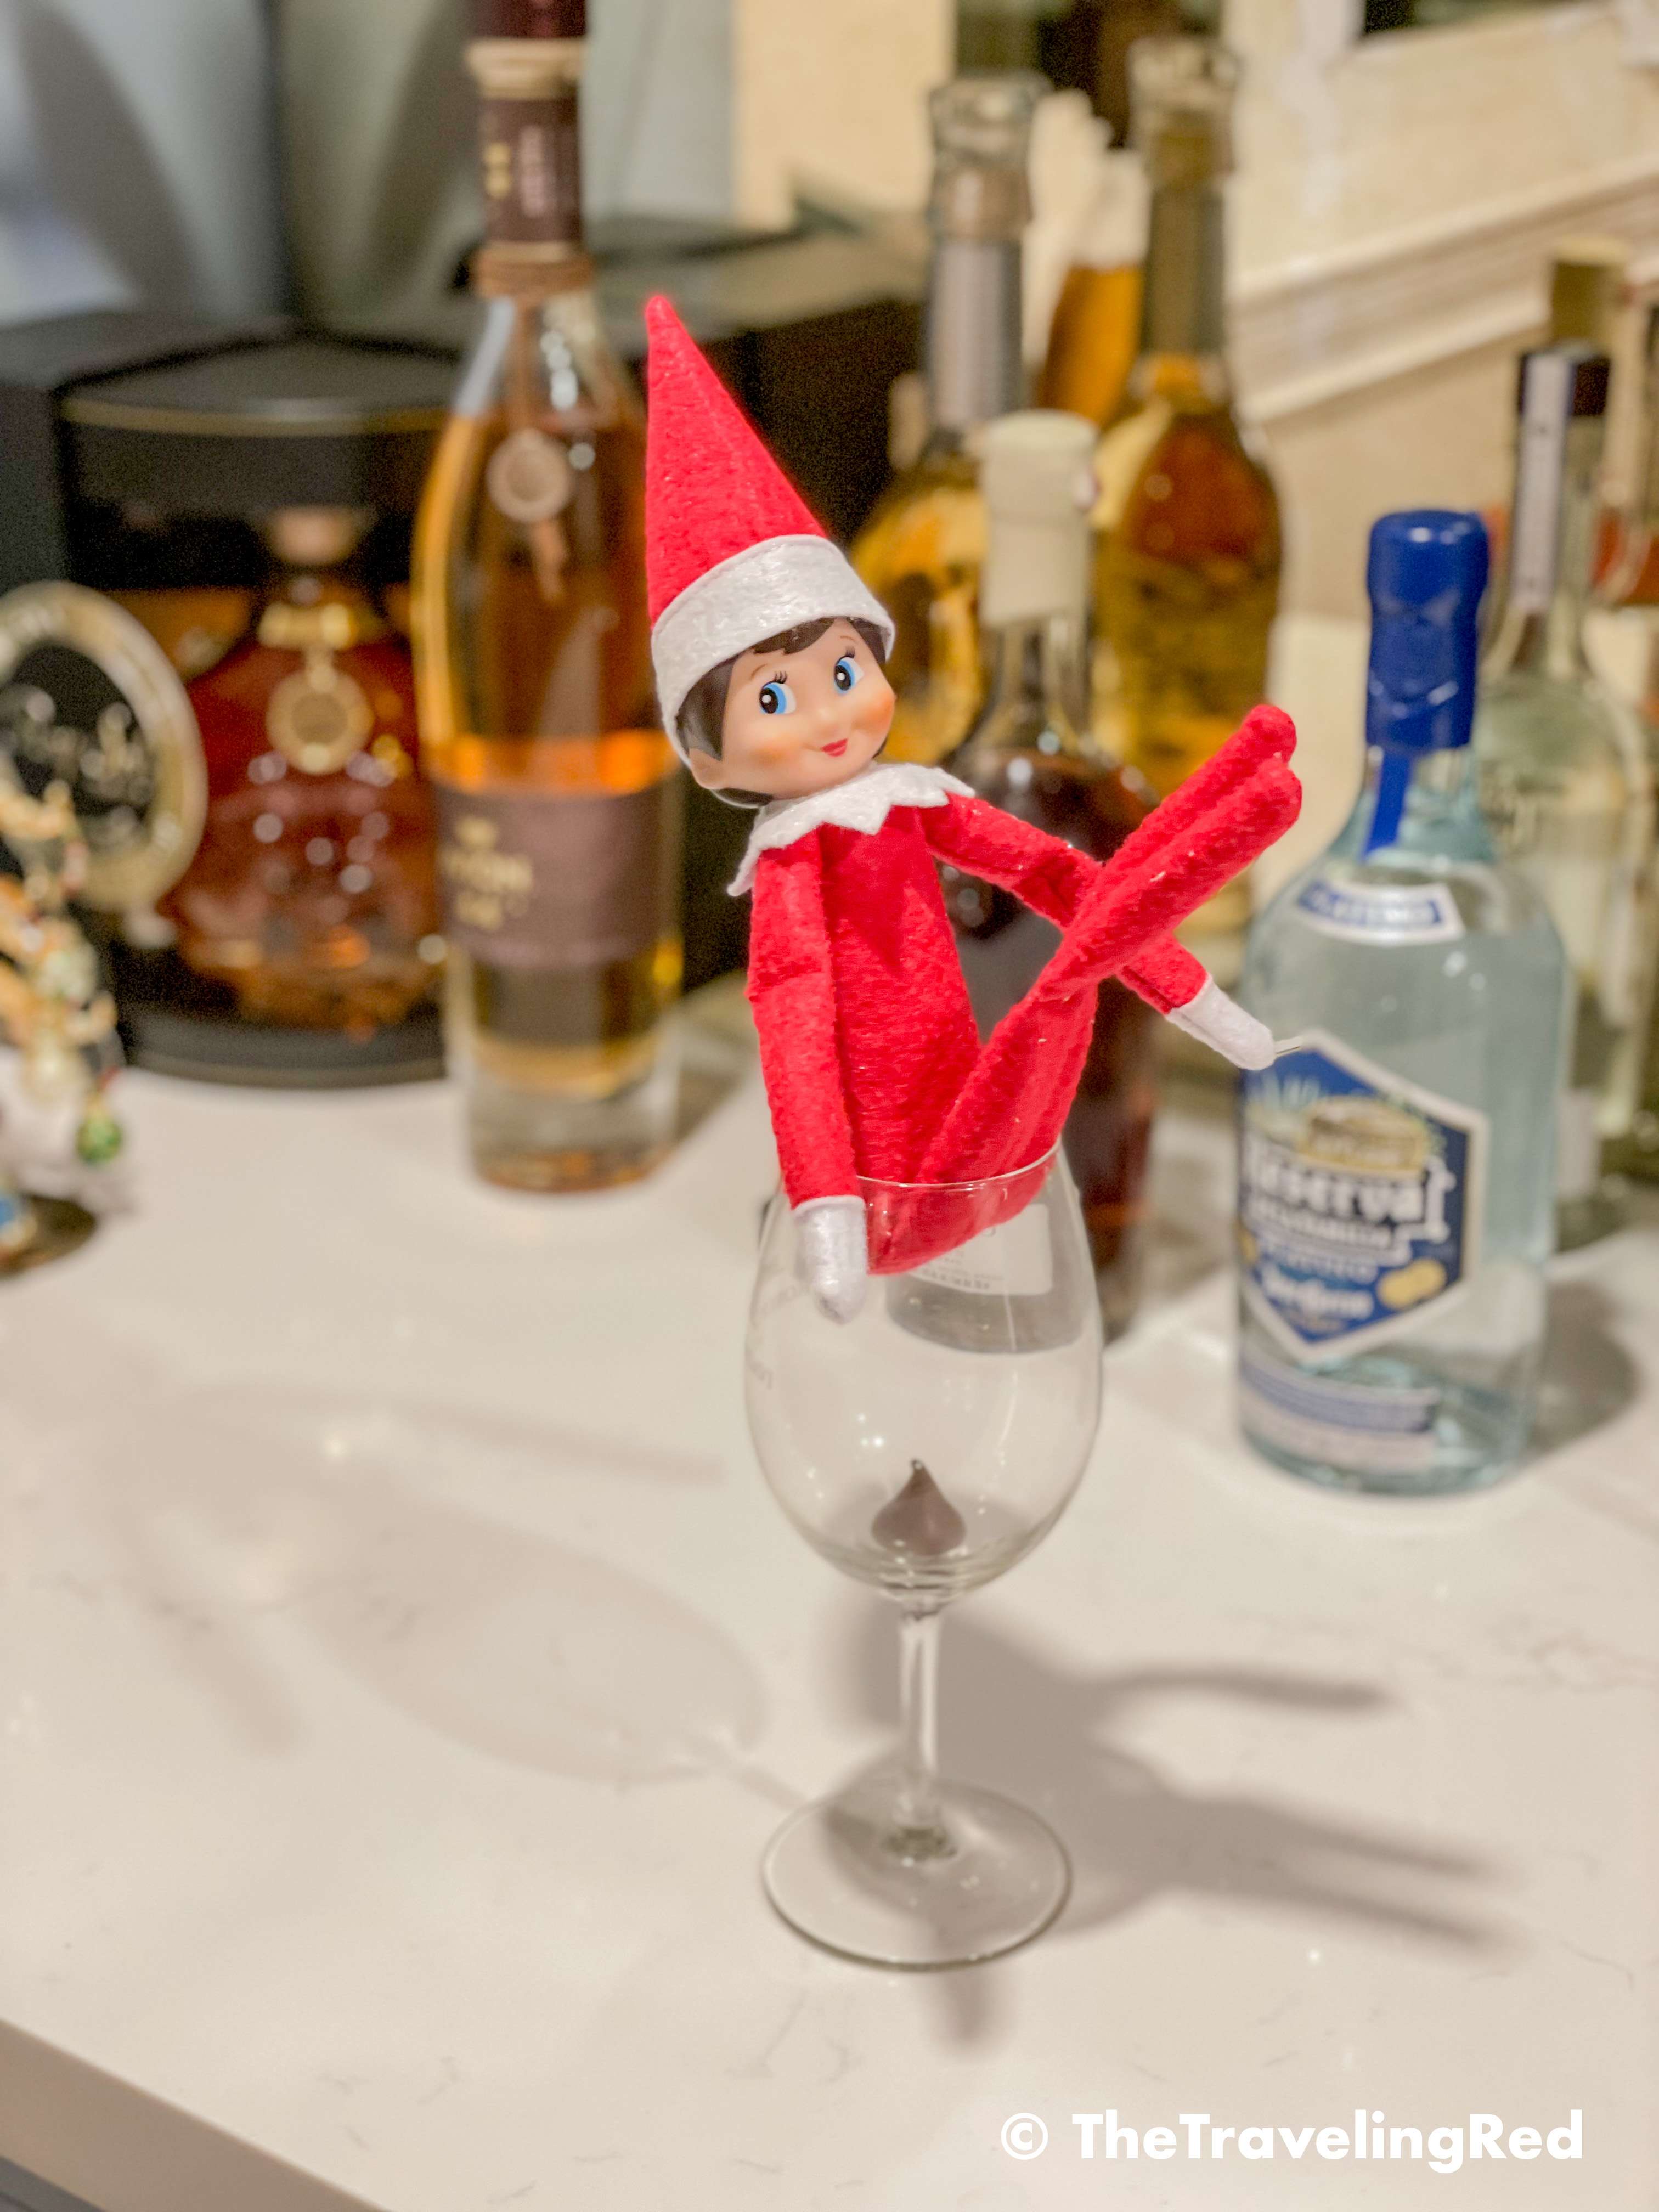 Naughty Elf on the shelf pooped a Hershey's kiss in a wine glass. Fun and easy elf on the shelf ideas for a naughty elf that are quick and easy using things you have at home.